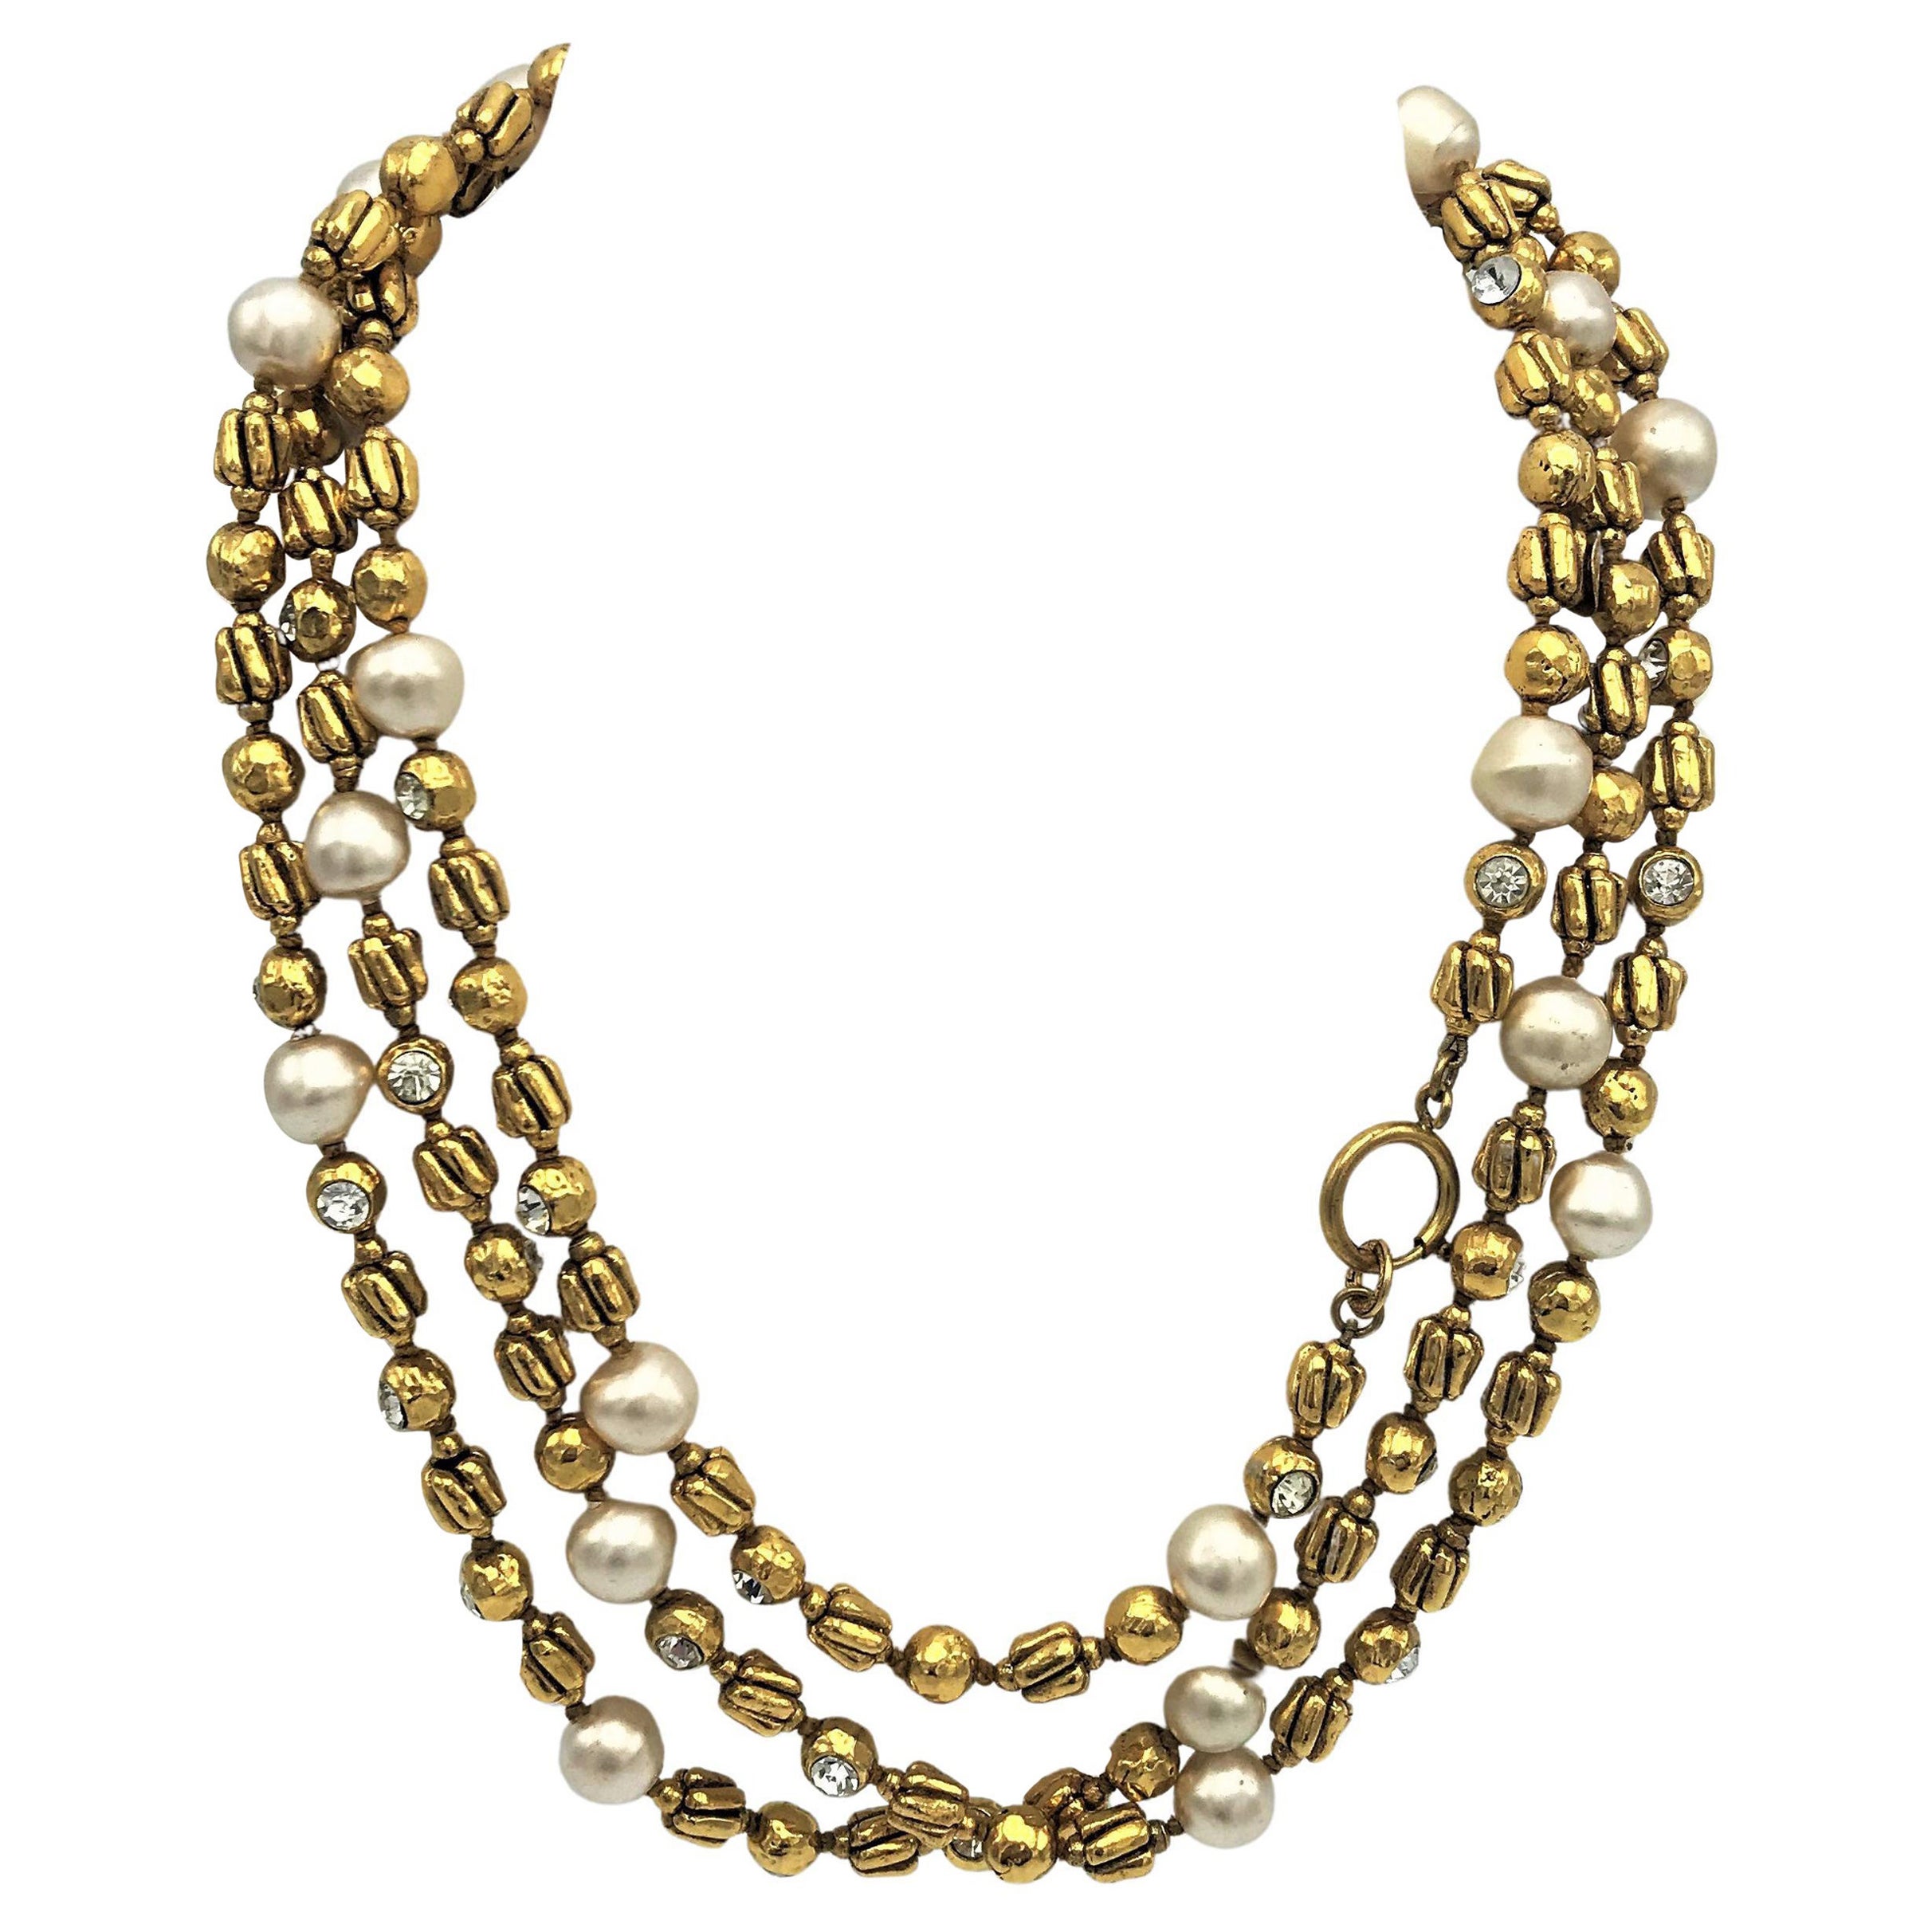 Chanel necklace by R. Goossens with pearls, 183 cm lang gold plated, 1970/80s  For Sale